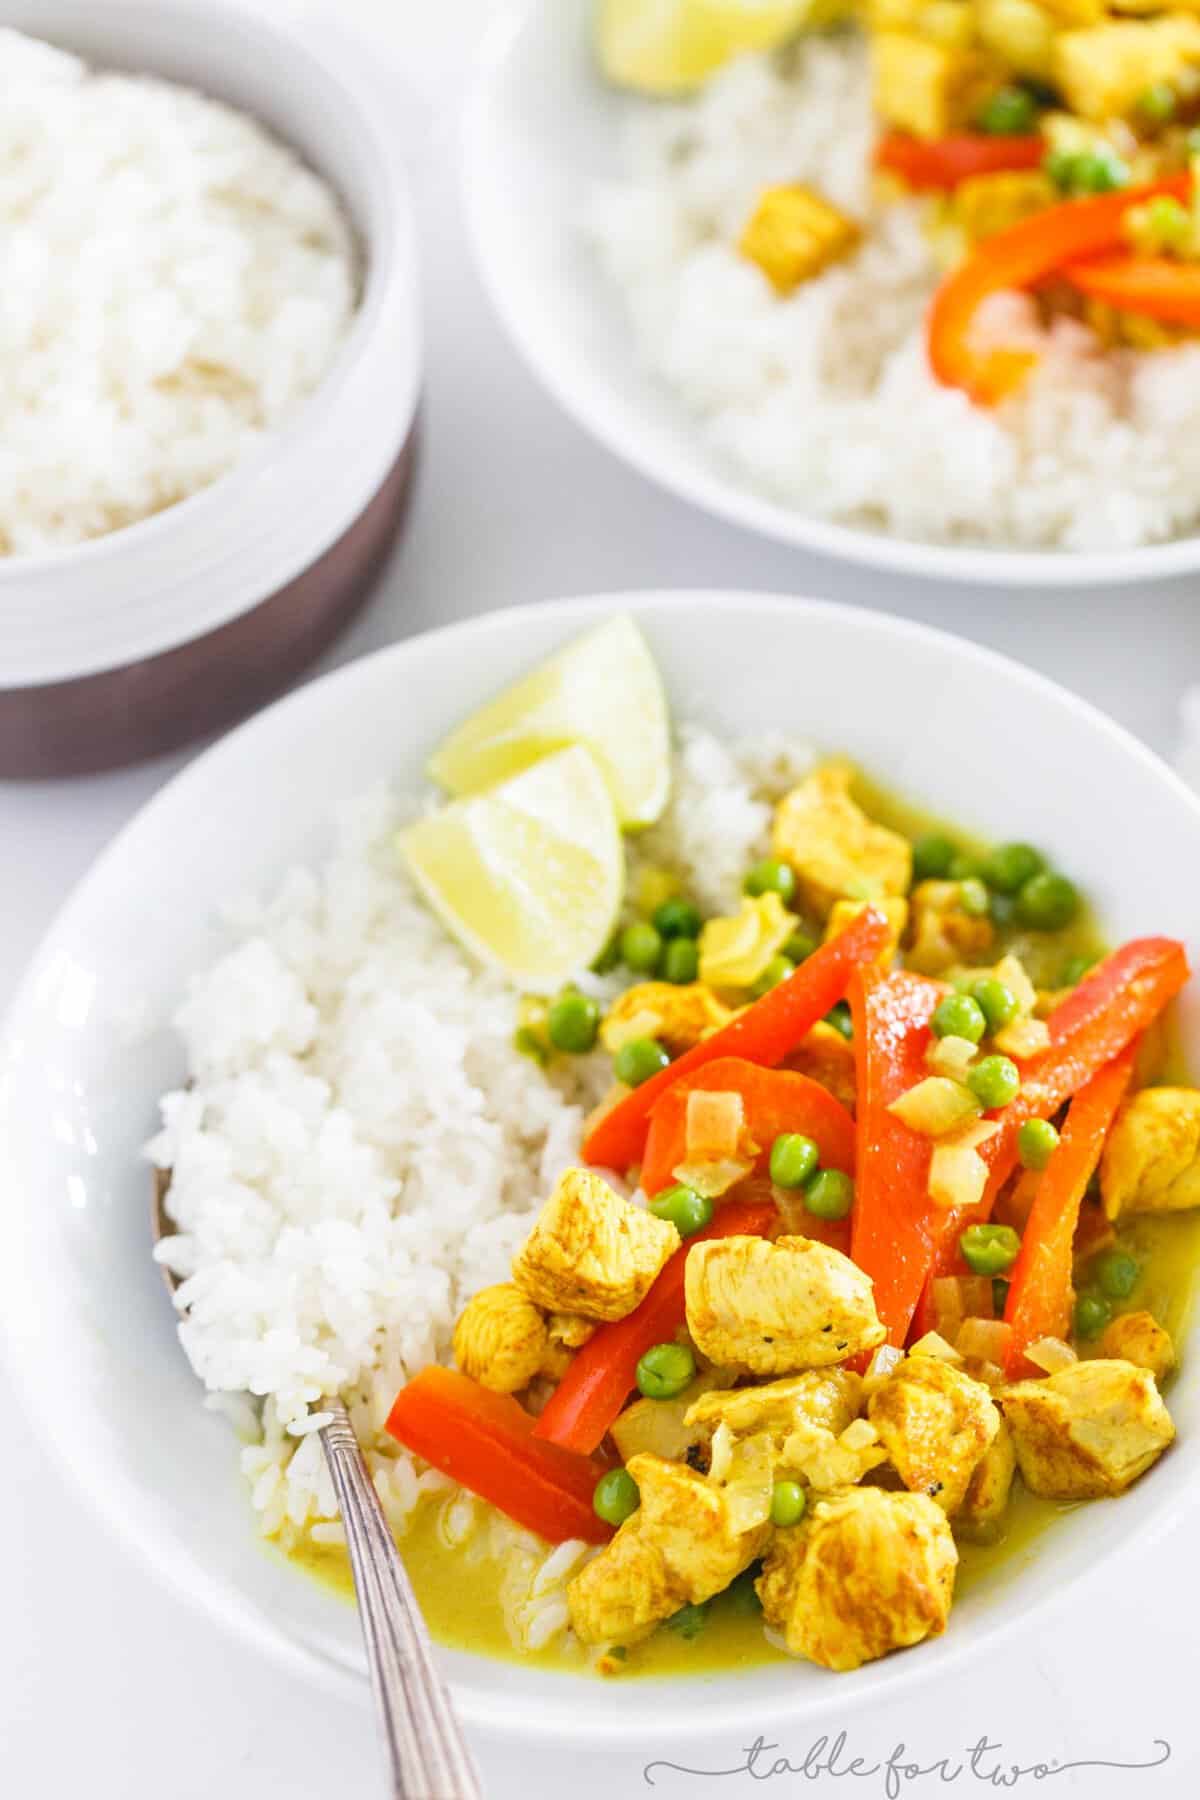 This green curry and coconut rice bowl is a delightfully flavorful easy weeknight meal or for meal prep. Simple to throw together yet not lacking in flavor one bit!